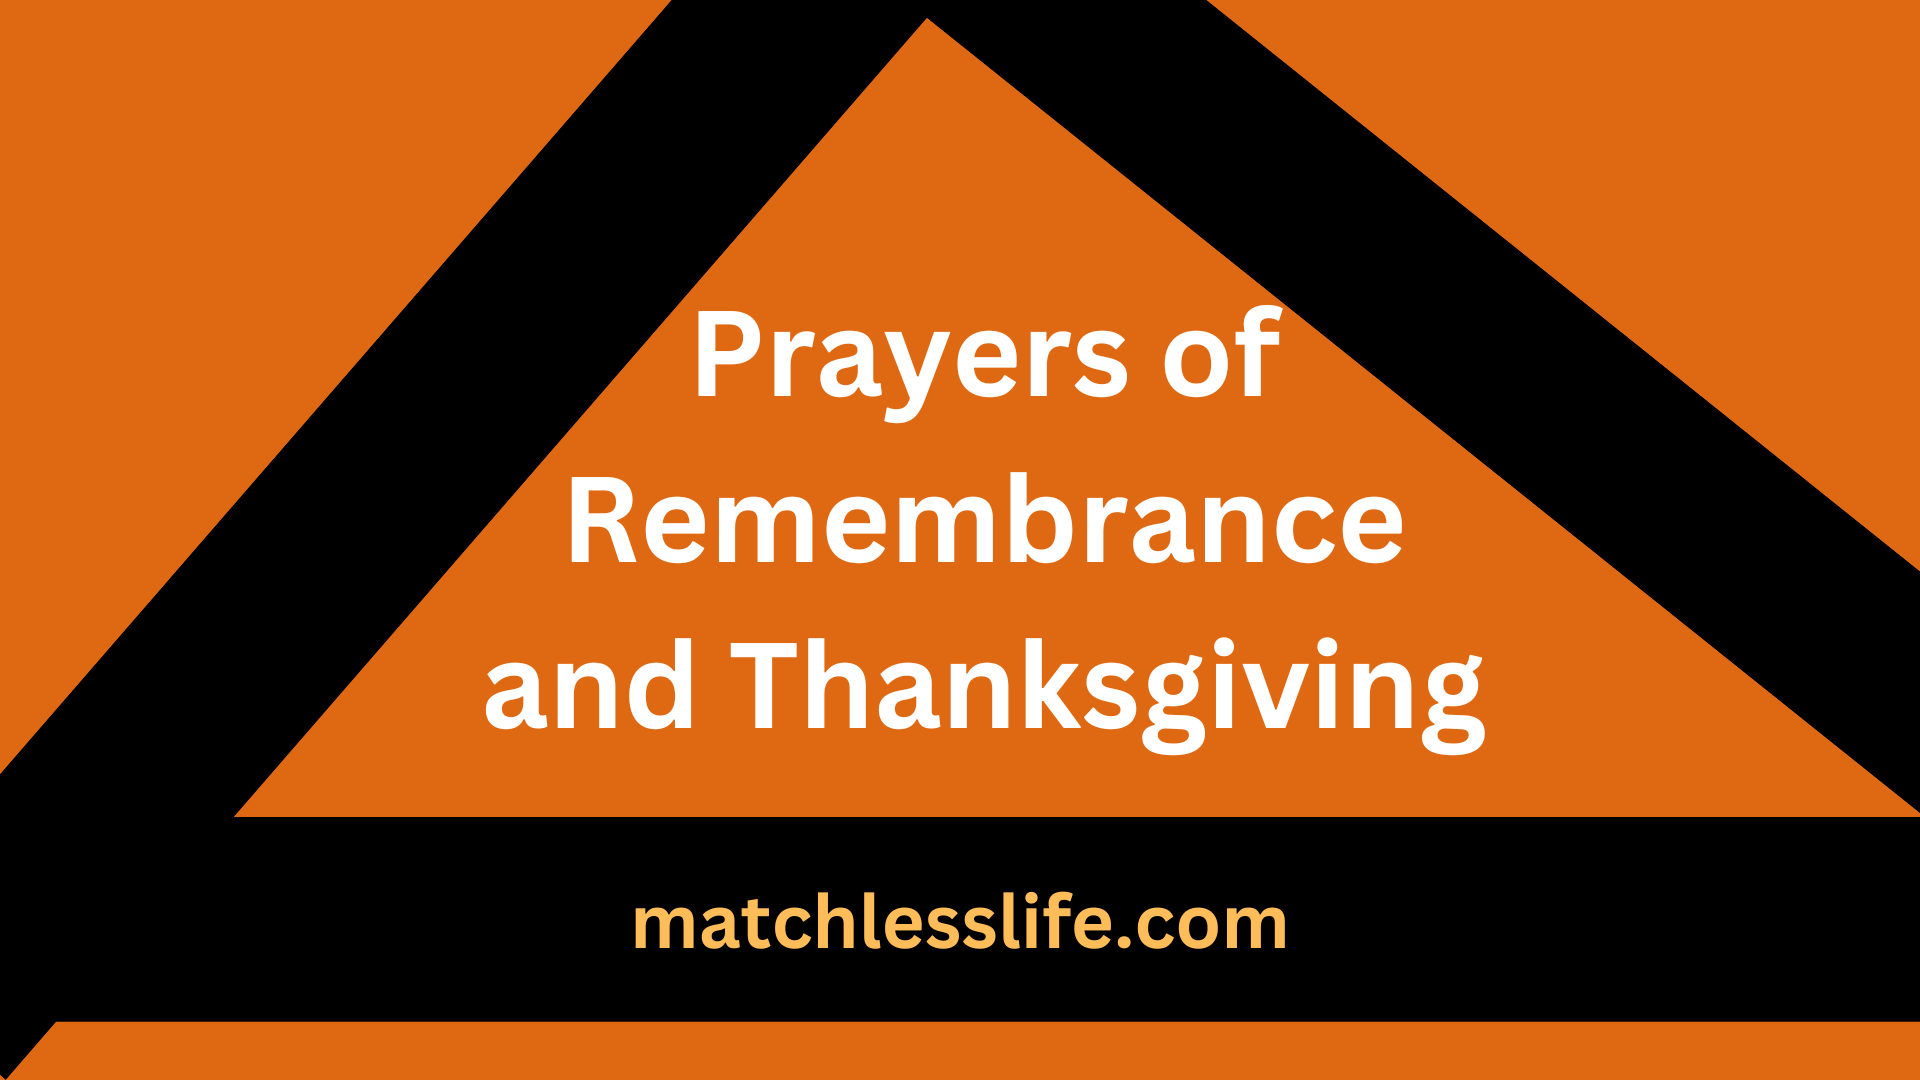 Prayers of Remembrance and Thanksgiving